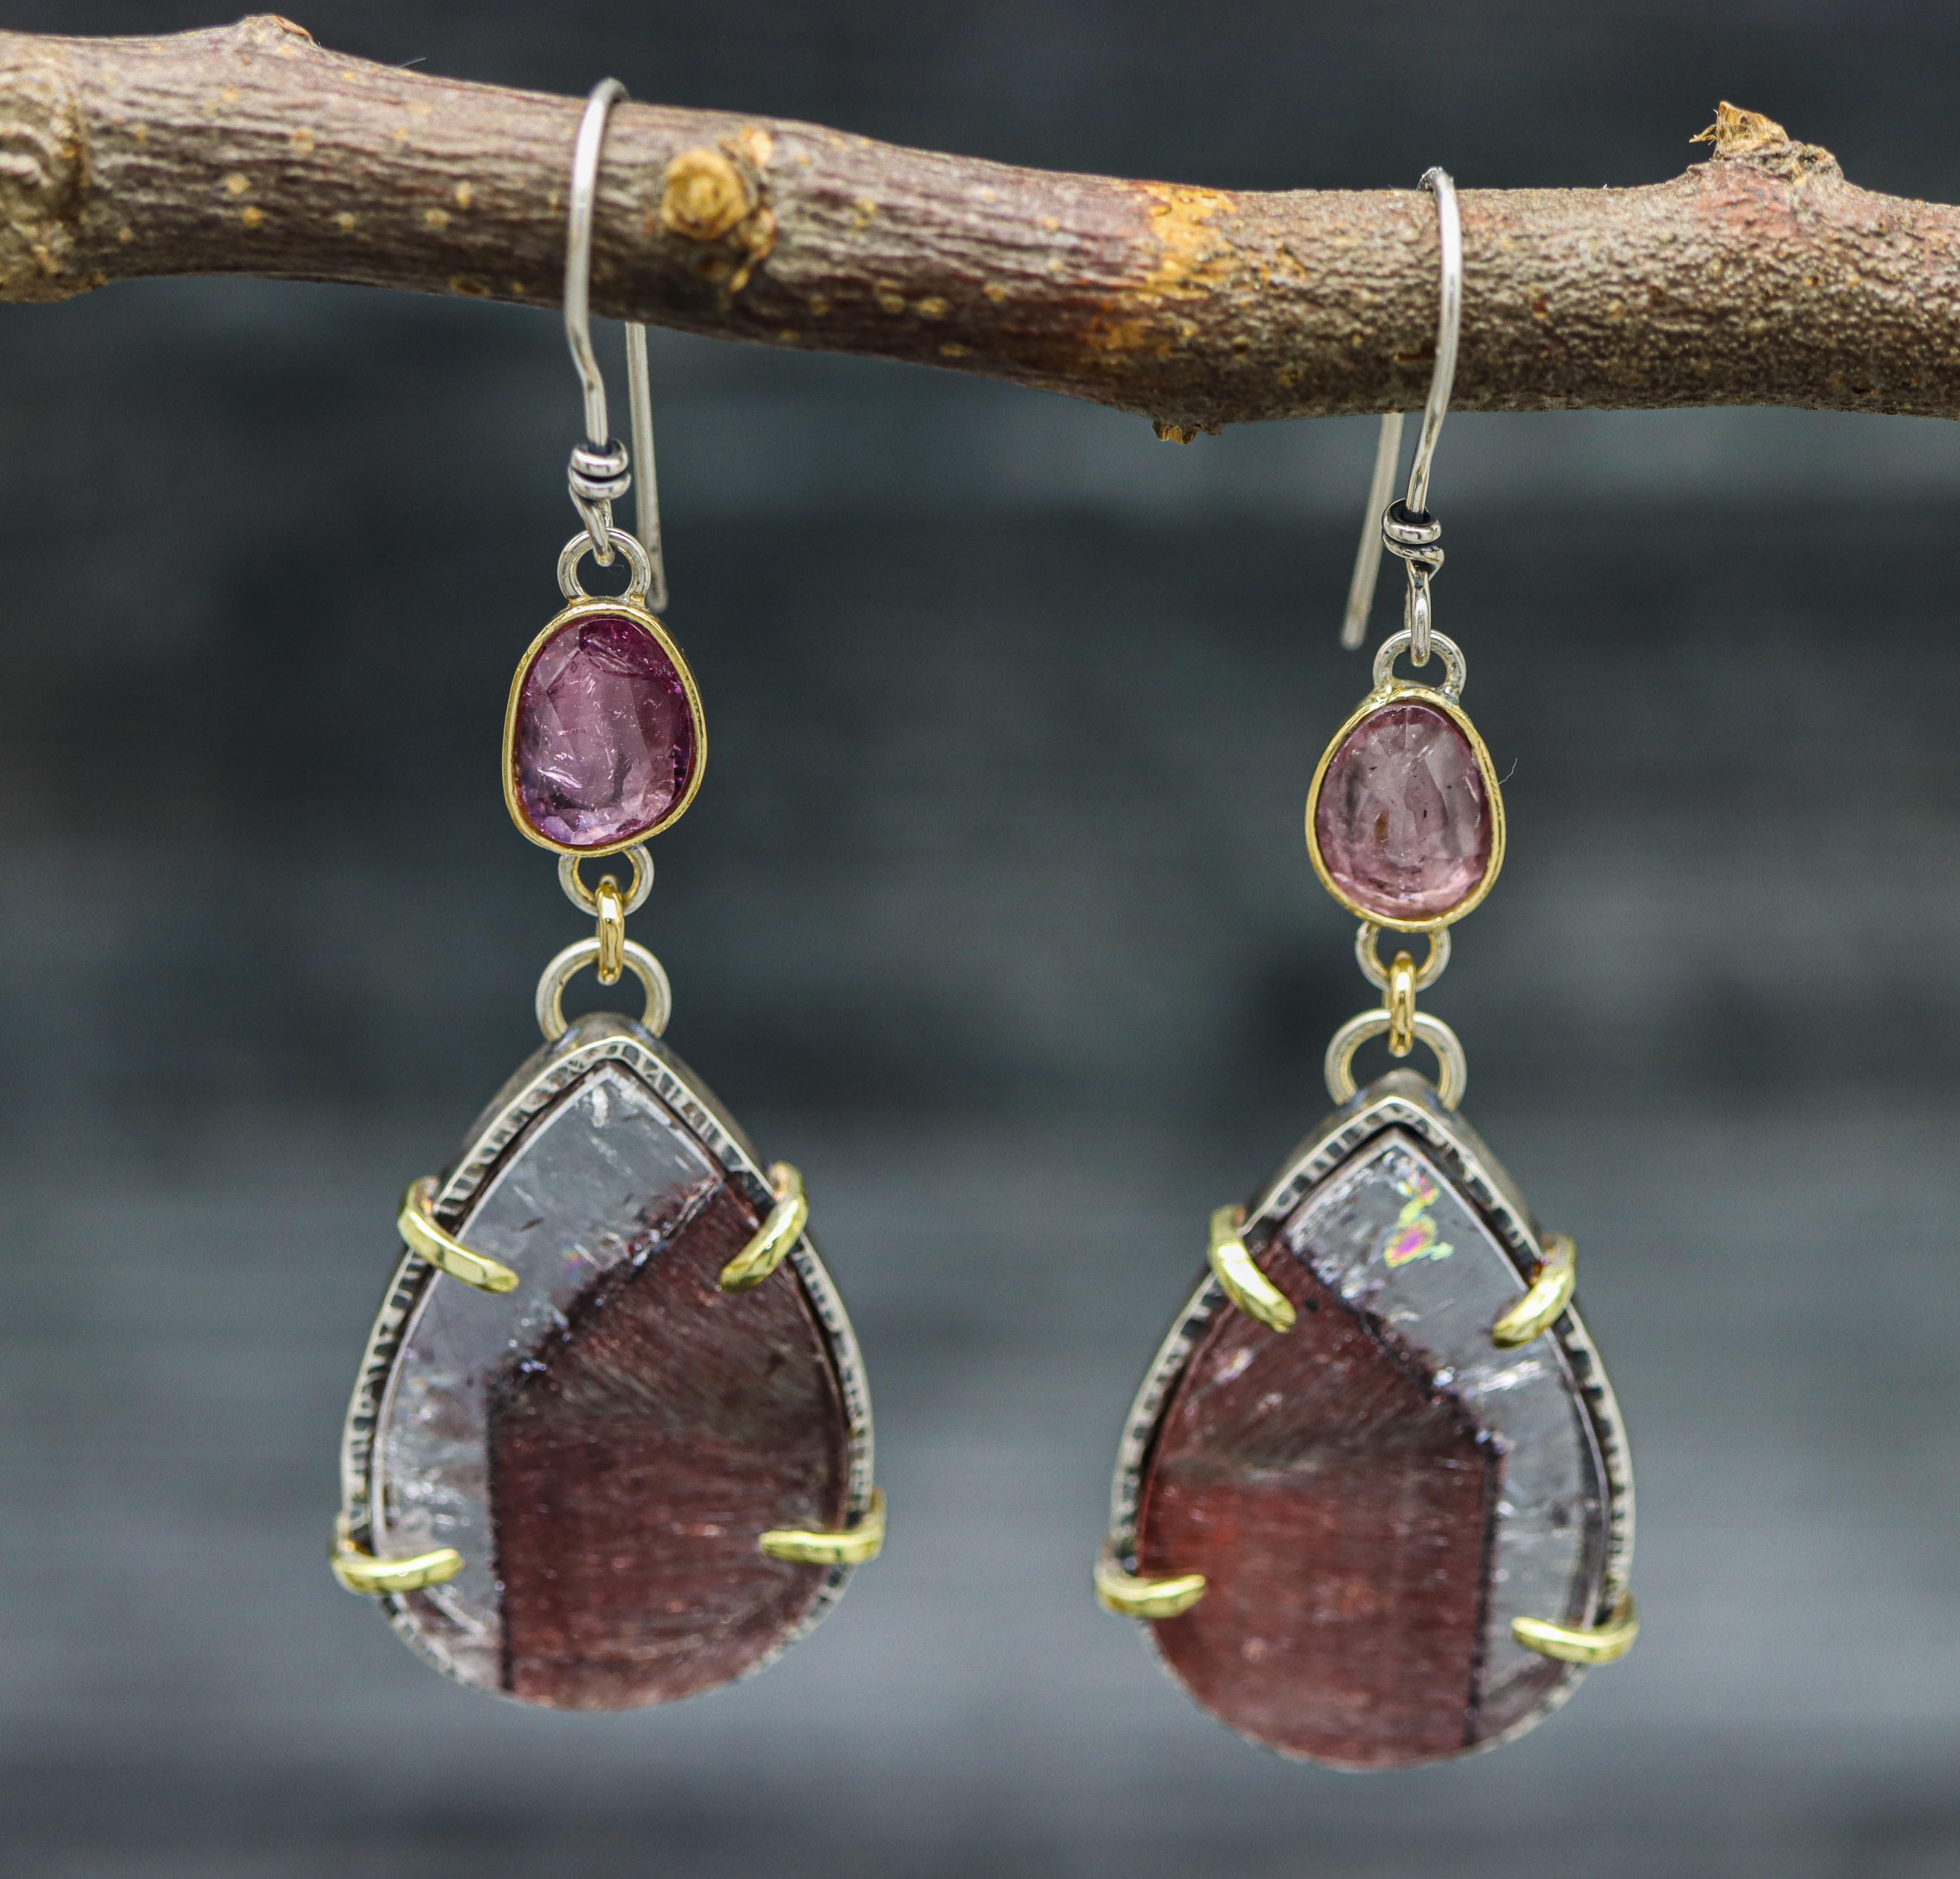 Super Seven and Pink Tourmaline Dangle Earrings Sterling Silver and 18k Gold